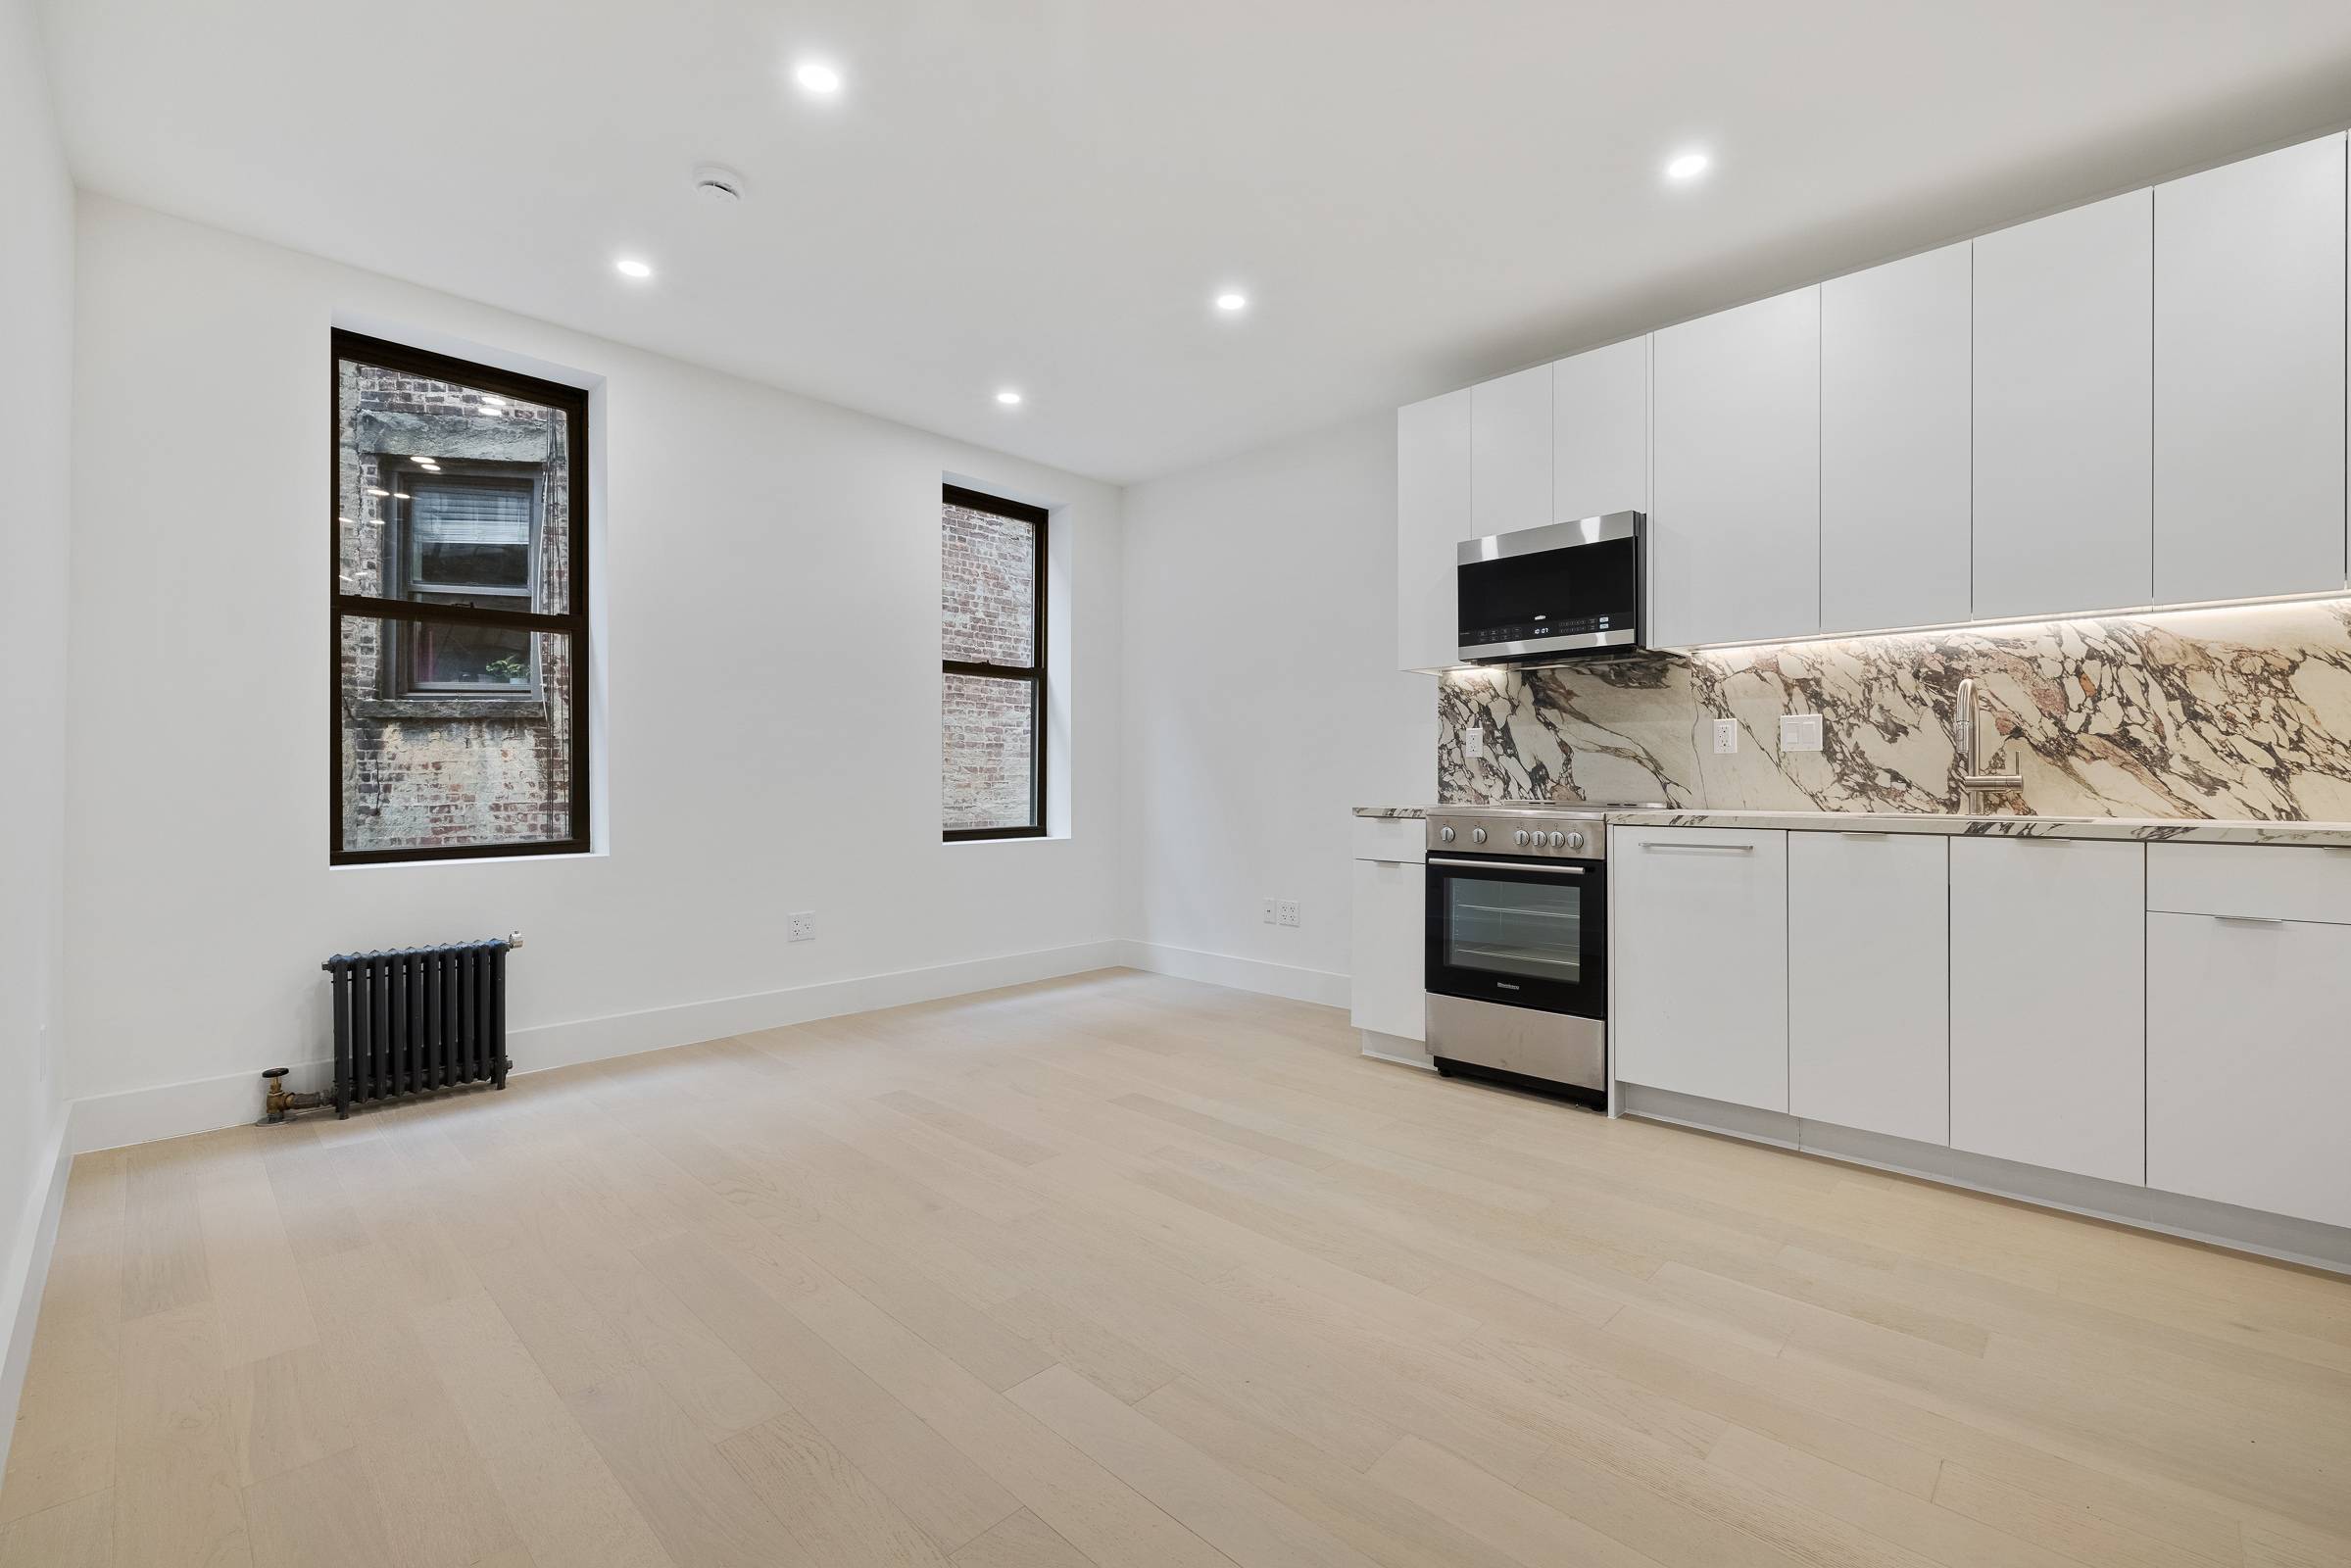 Beautifully gut renovated 1 bedroom, 1 bath residence featuring a stunning large kitchen with stainless steel appliances, wide plank Oak flooring, spacious bedrooms and in unit washer dryer.